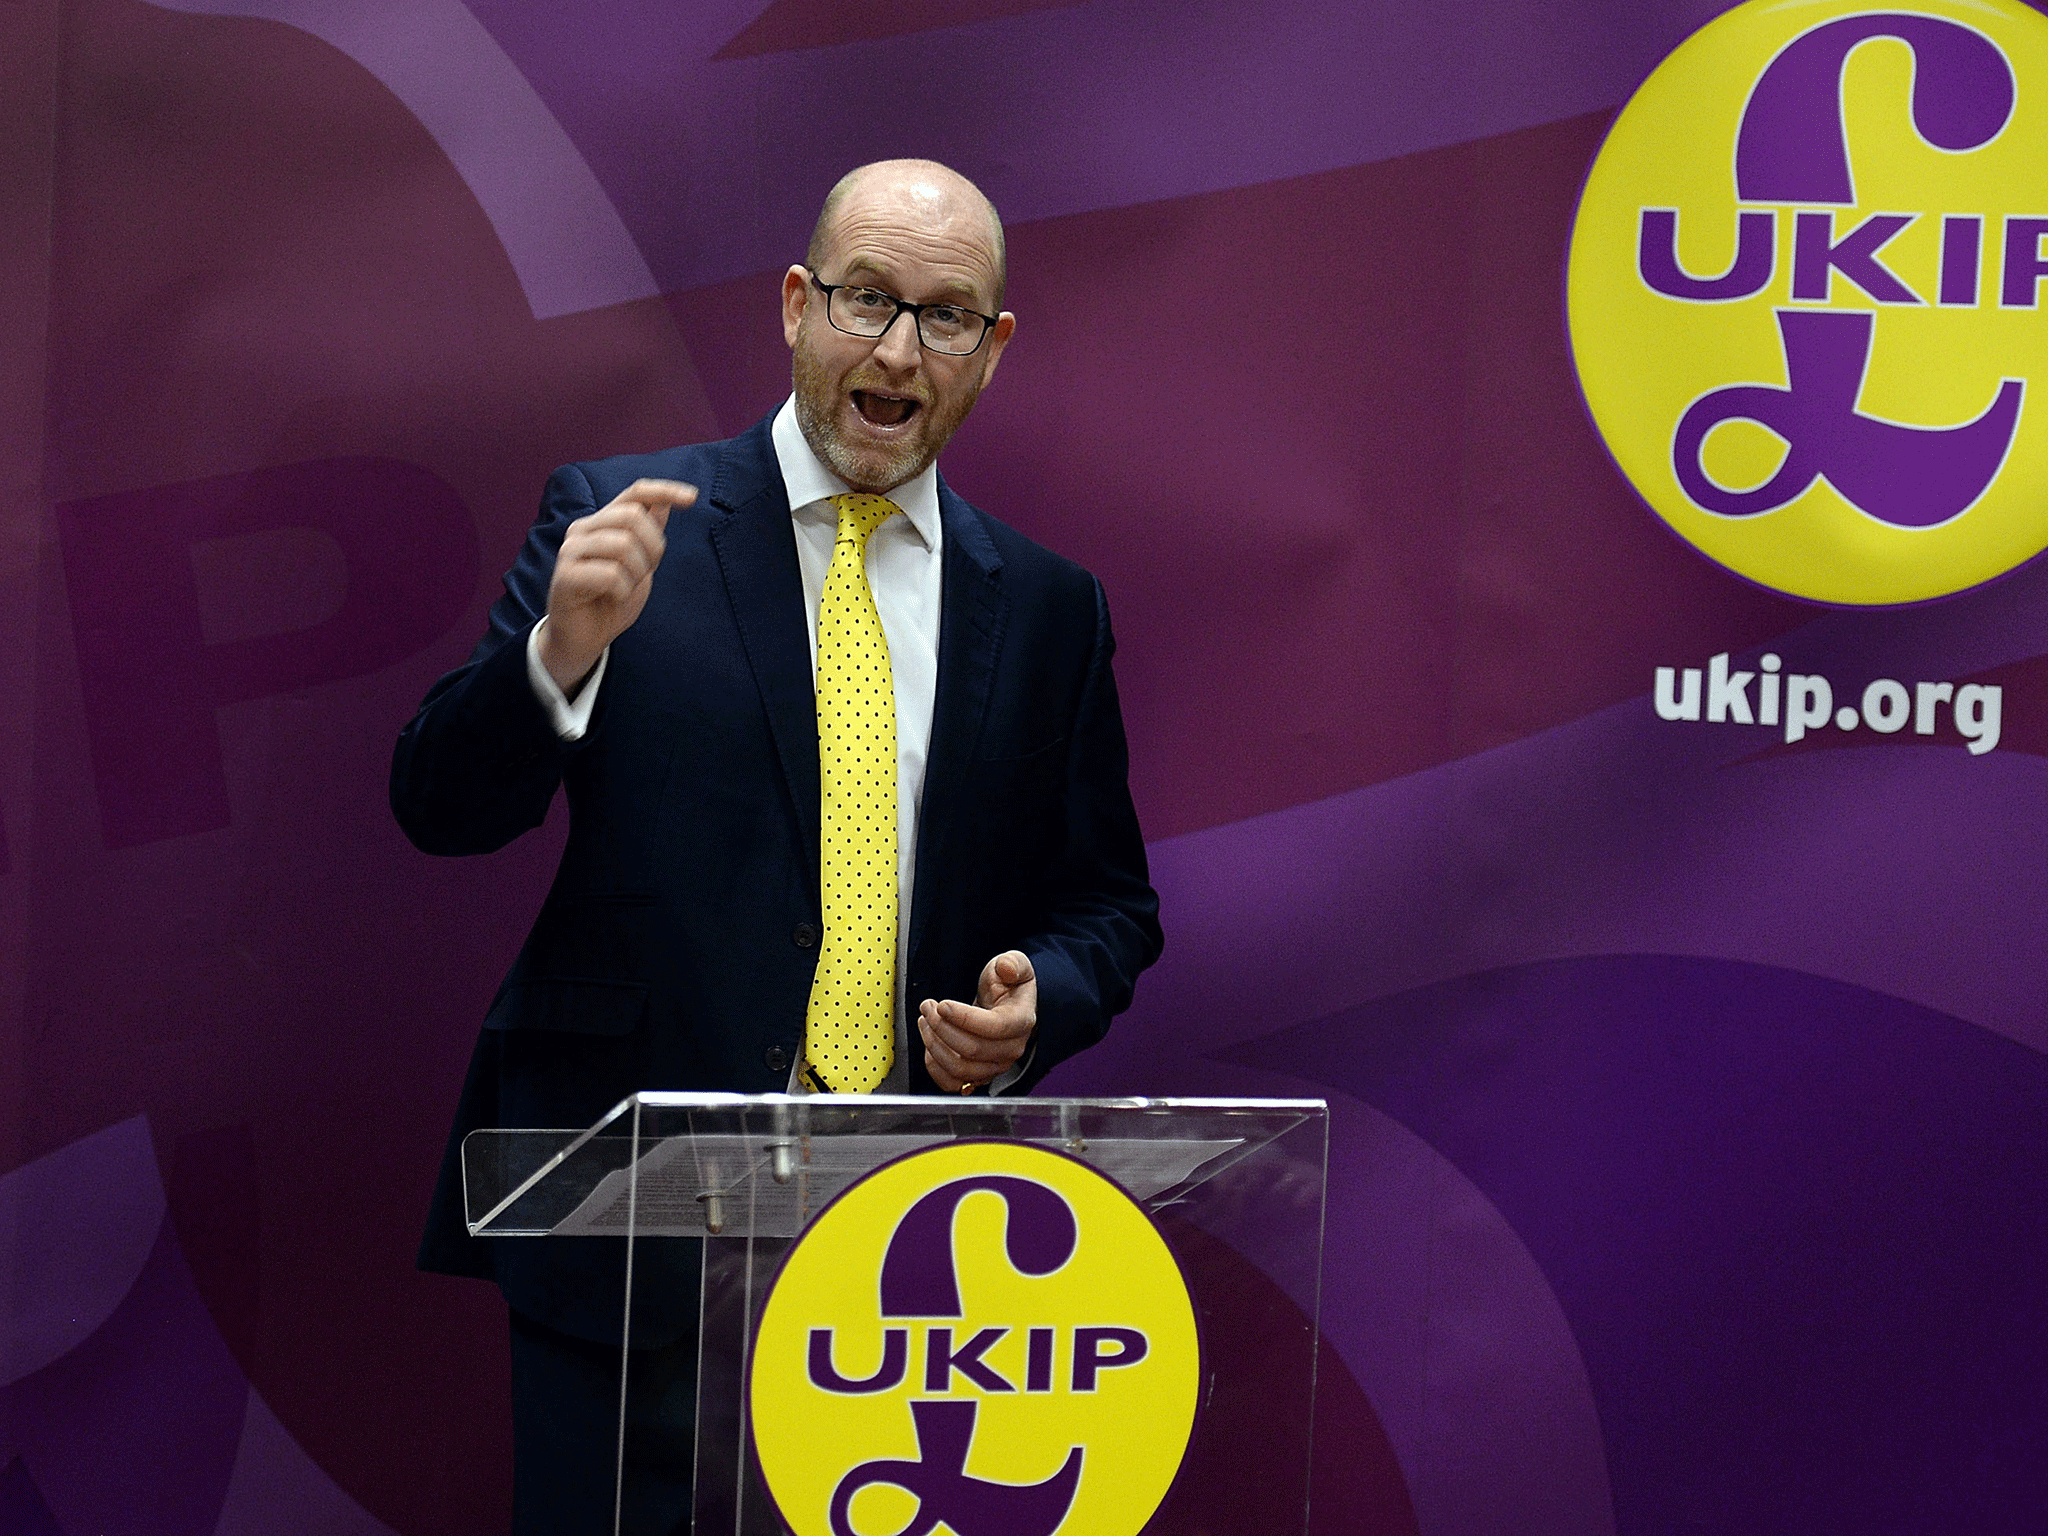 Ukip leader Paul Nuttall is standing in a crucial by-election in Stoke-on-Trent next week. Hate crimes have soared in Staffordshire since the EU referendum